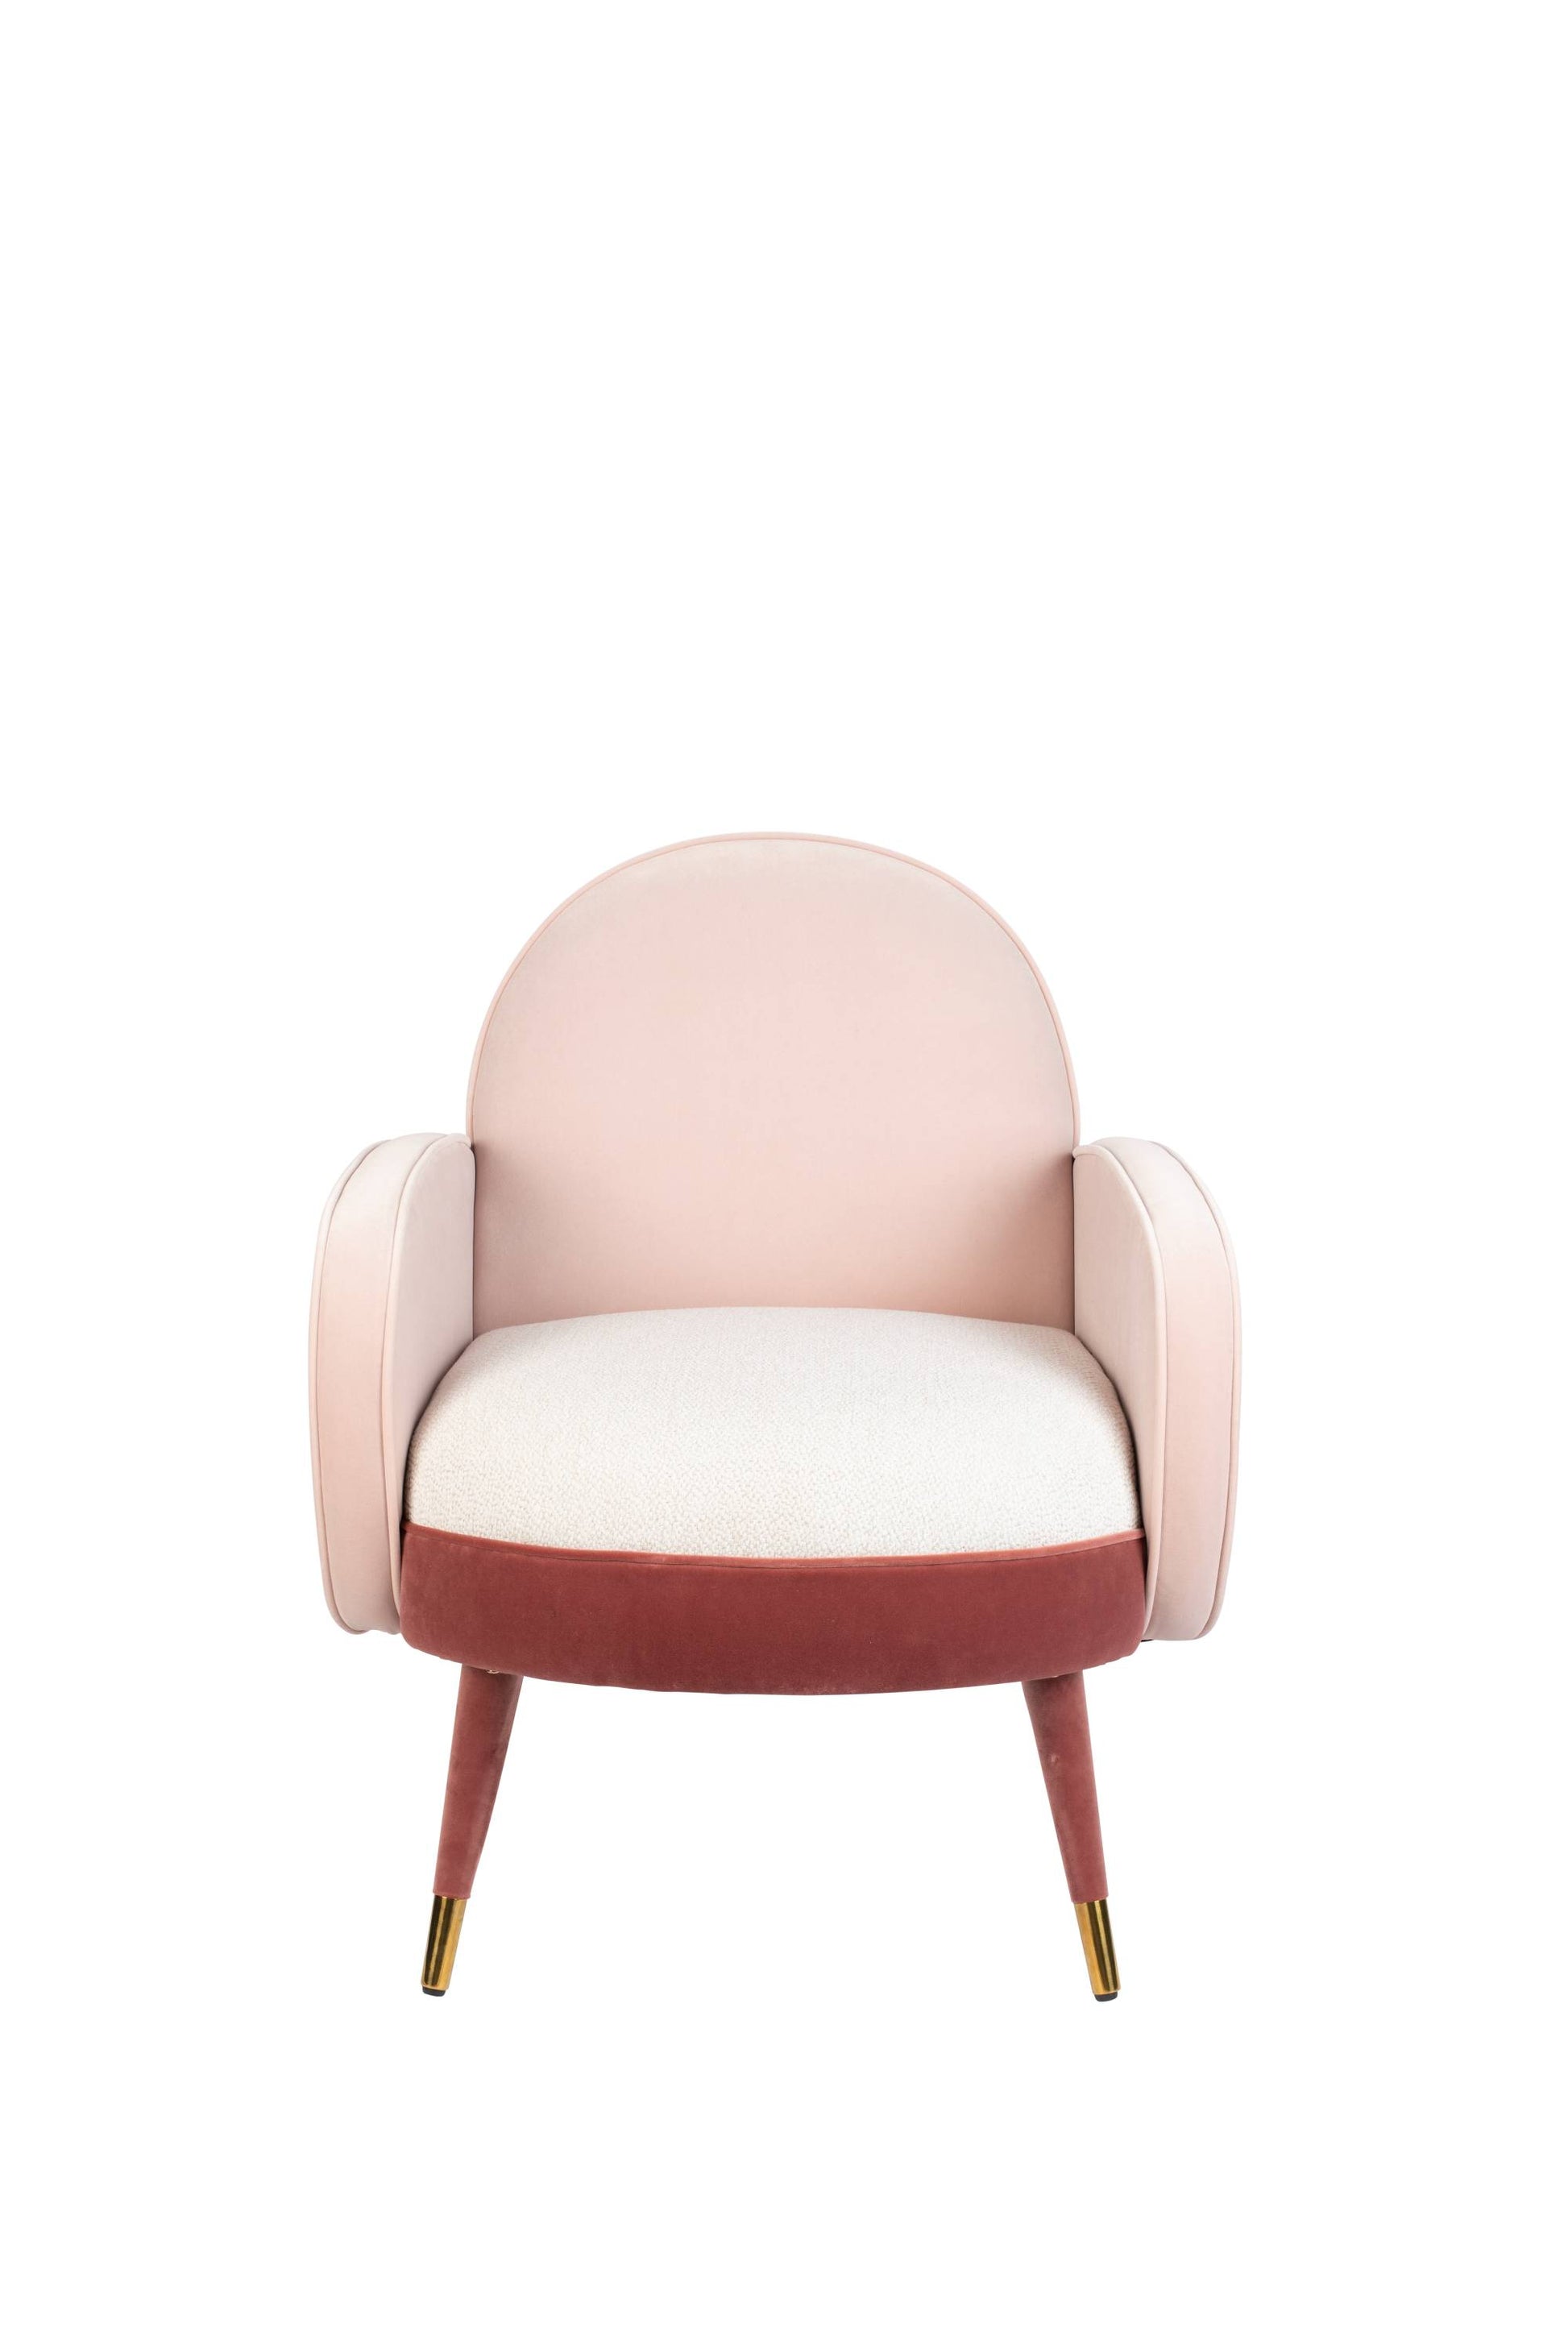 Zuiver | LOUNGE CHAIR SAM PINK/WHITE FR Default Title